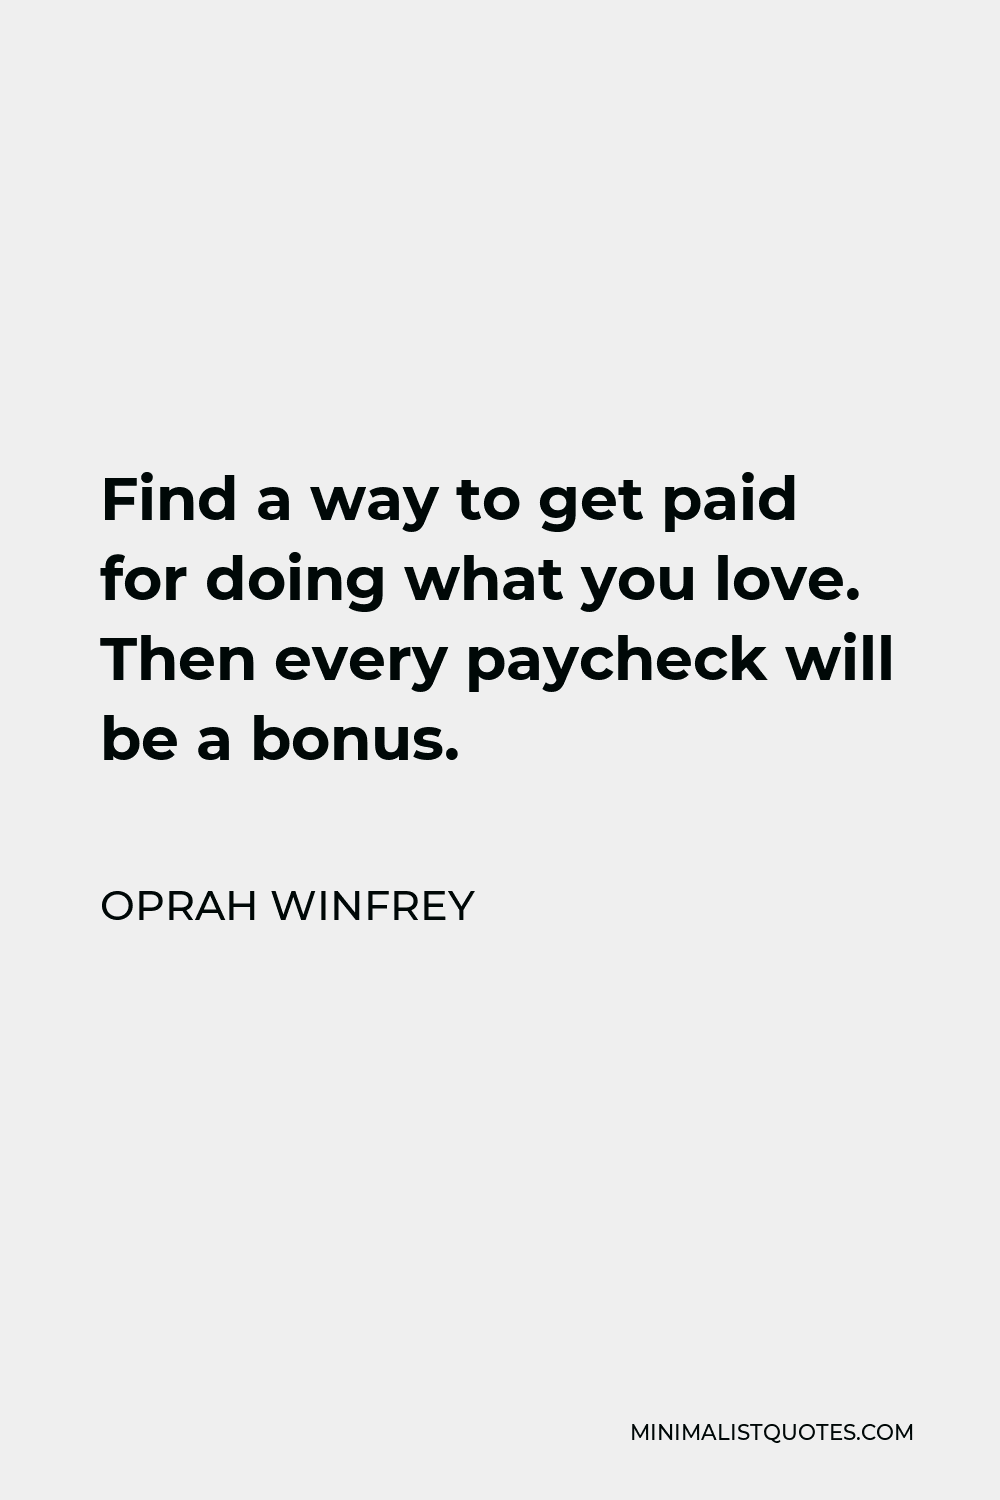 Oprah Winfrey Quote - Find a way to get paid for doing what you love. Then every paycheck will be a bonus.